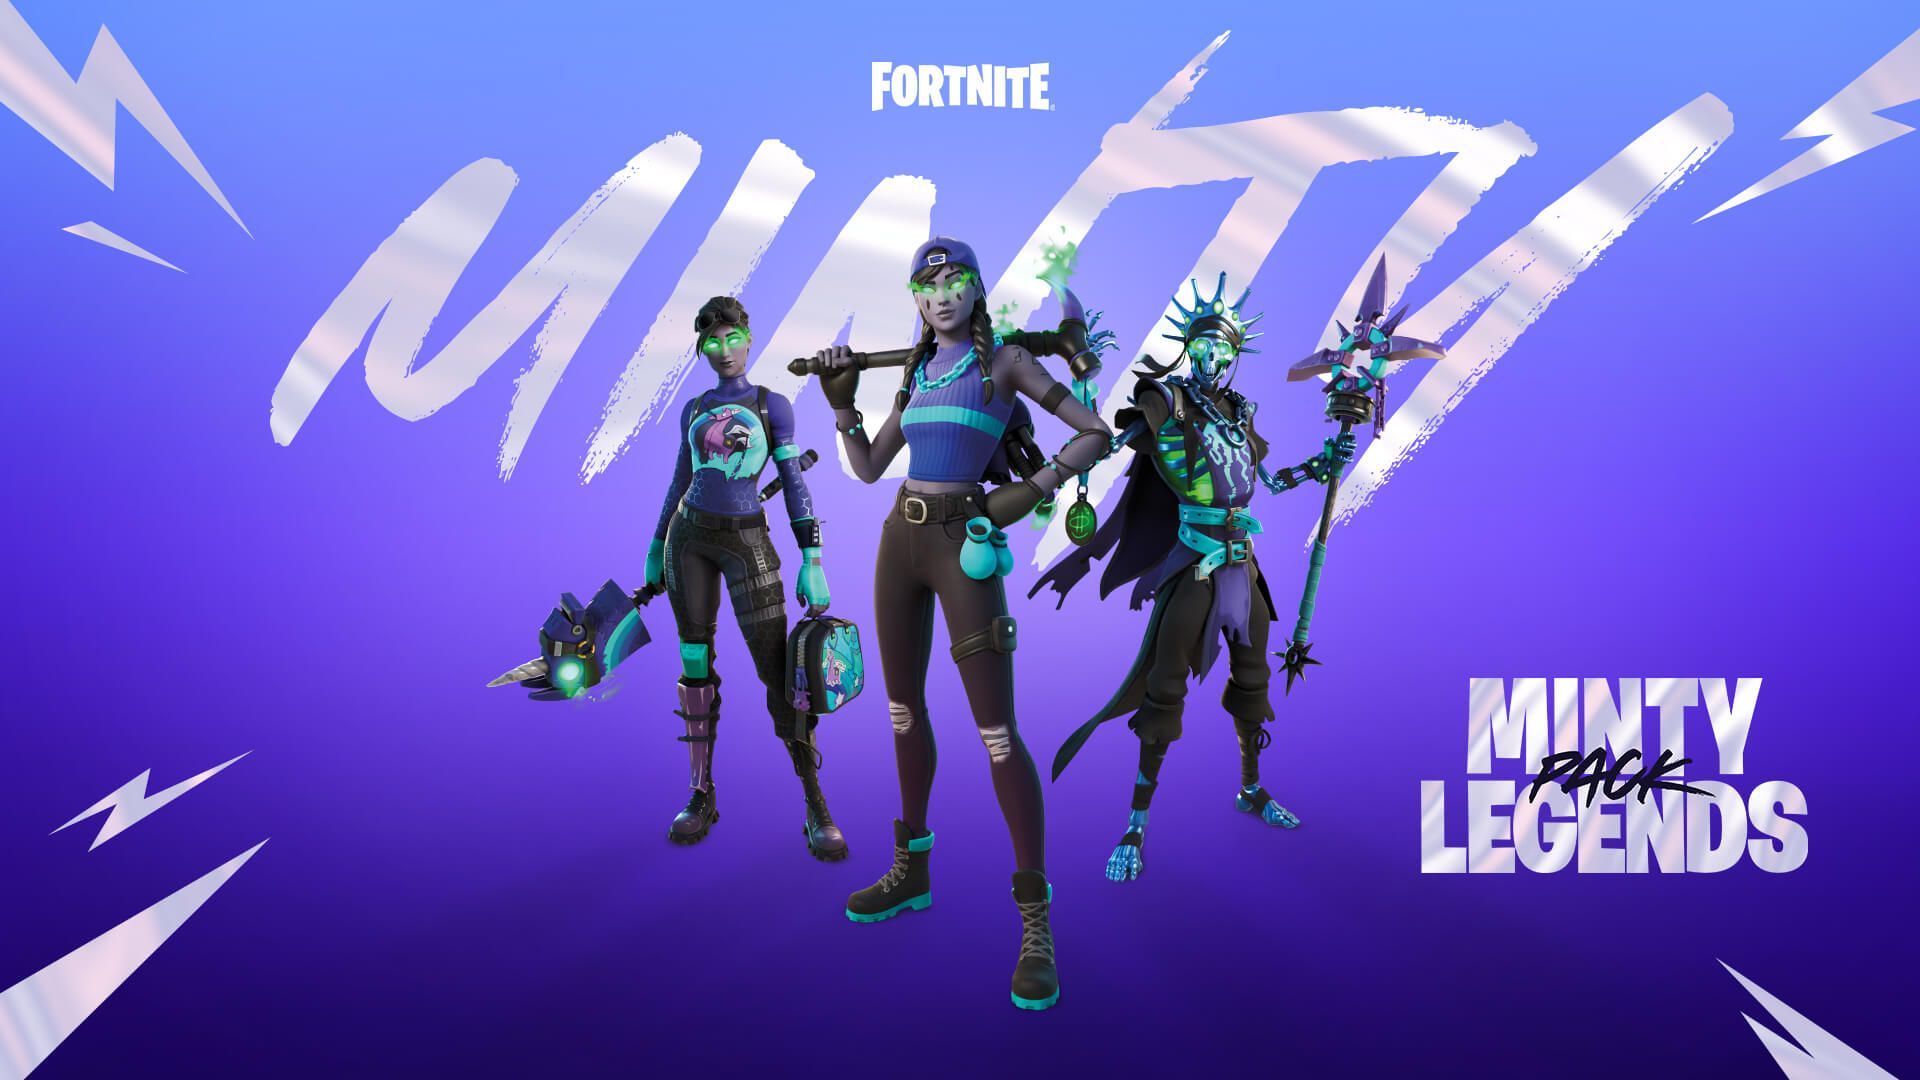 The new Minty Legends Pack is now available